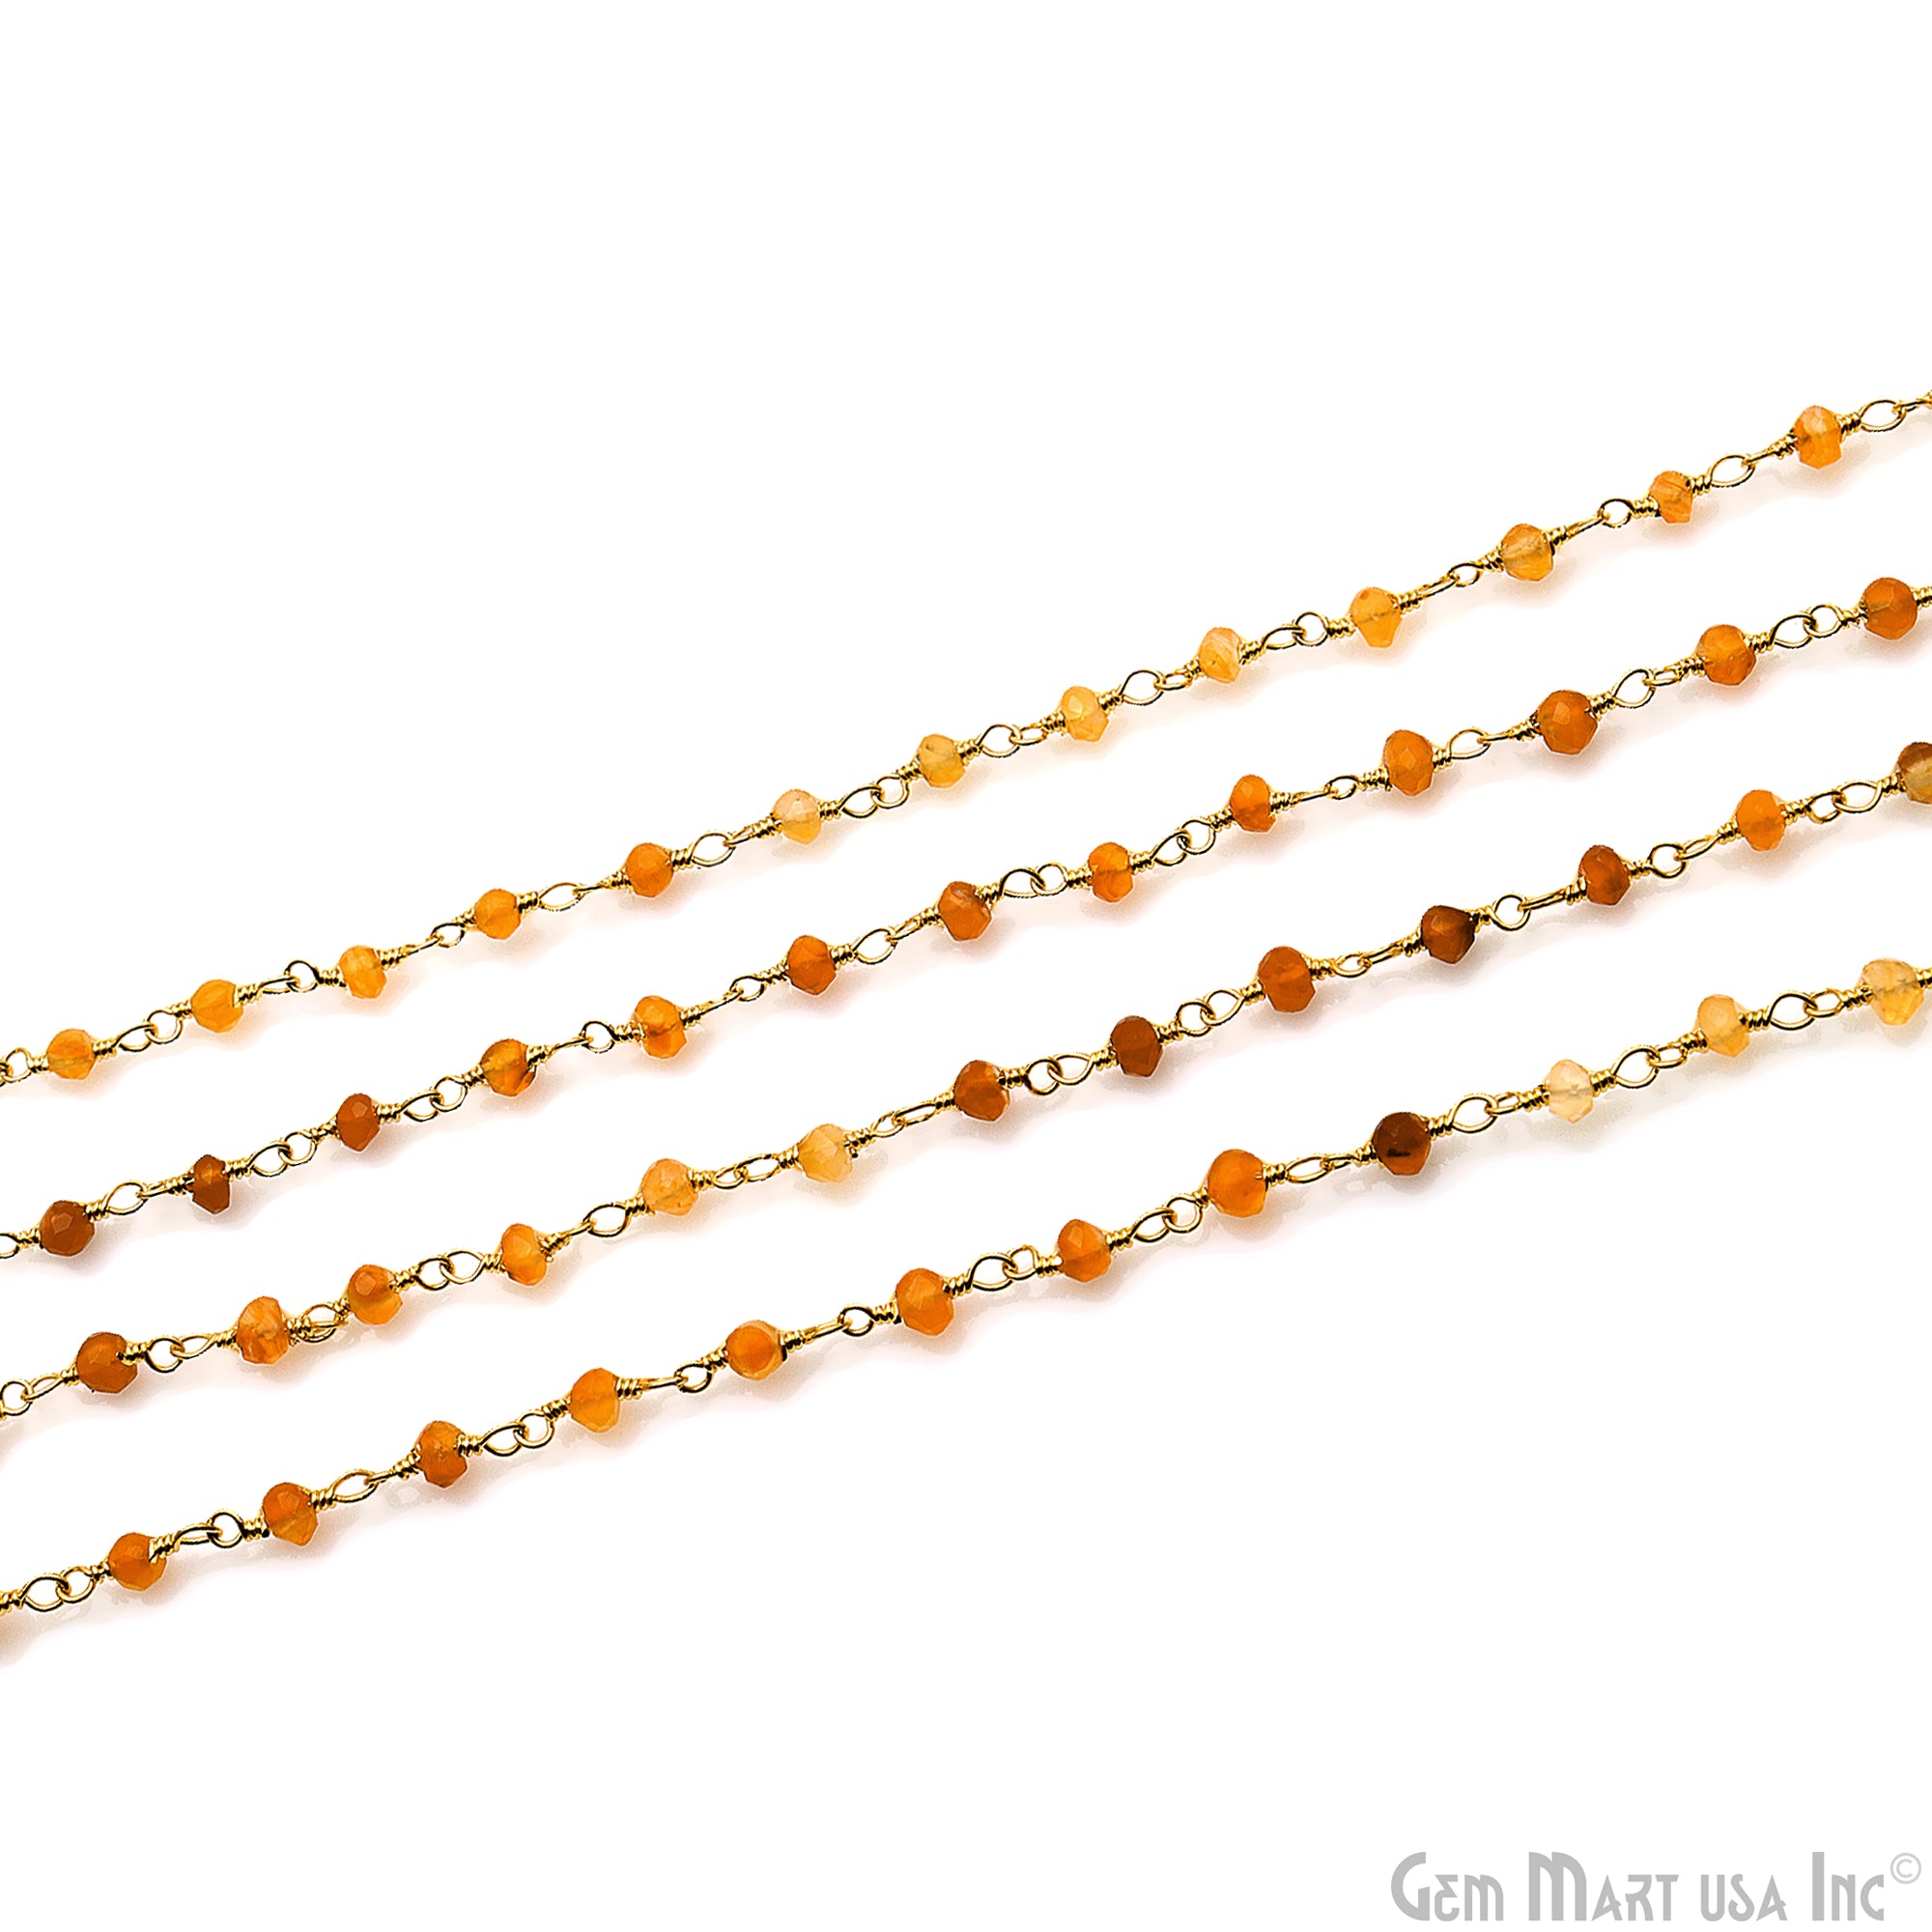 Carnelian 2-2.5mm Round Tiny Beads Gold Plated Rosary Chain